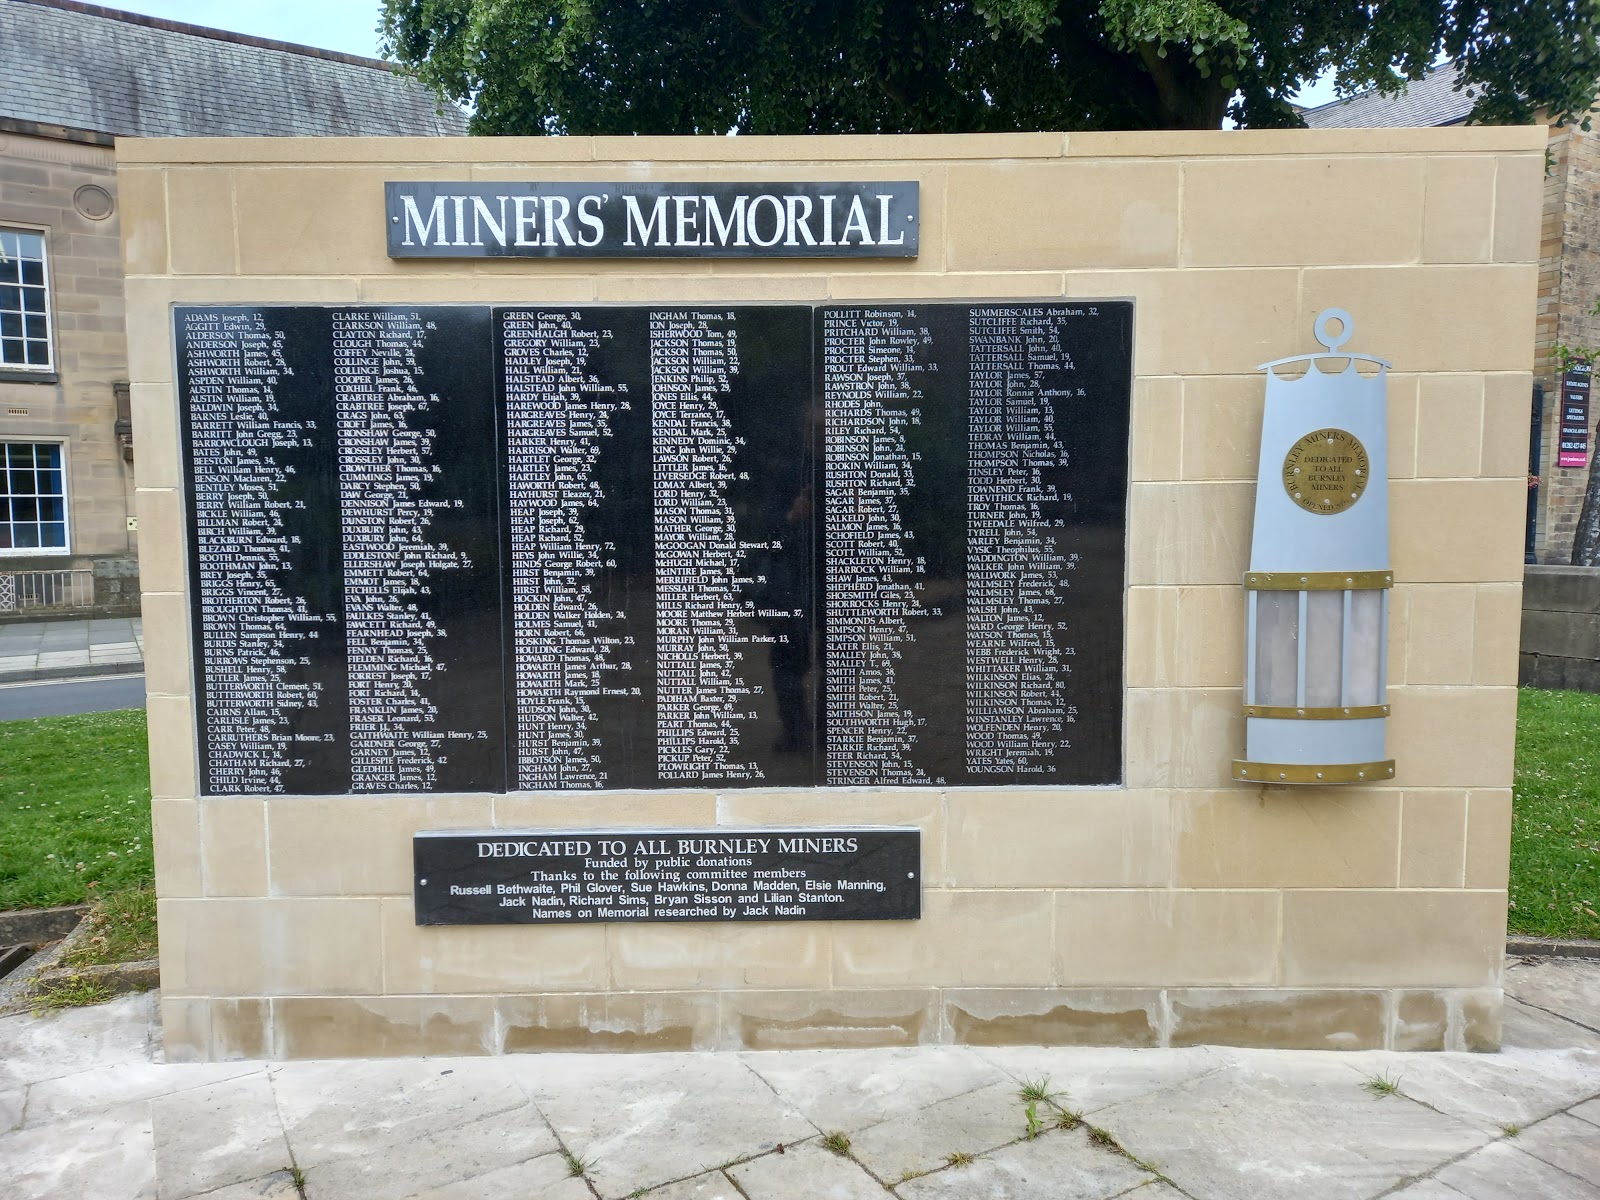 https://whatremovals.co.uk/wp-content/uploads/2022/02/Miners' Memorial-300x225.jpeg